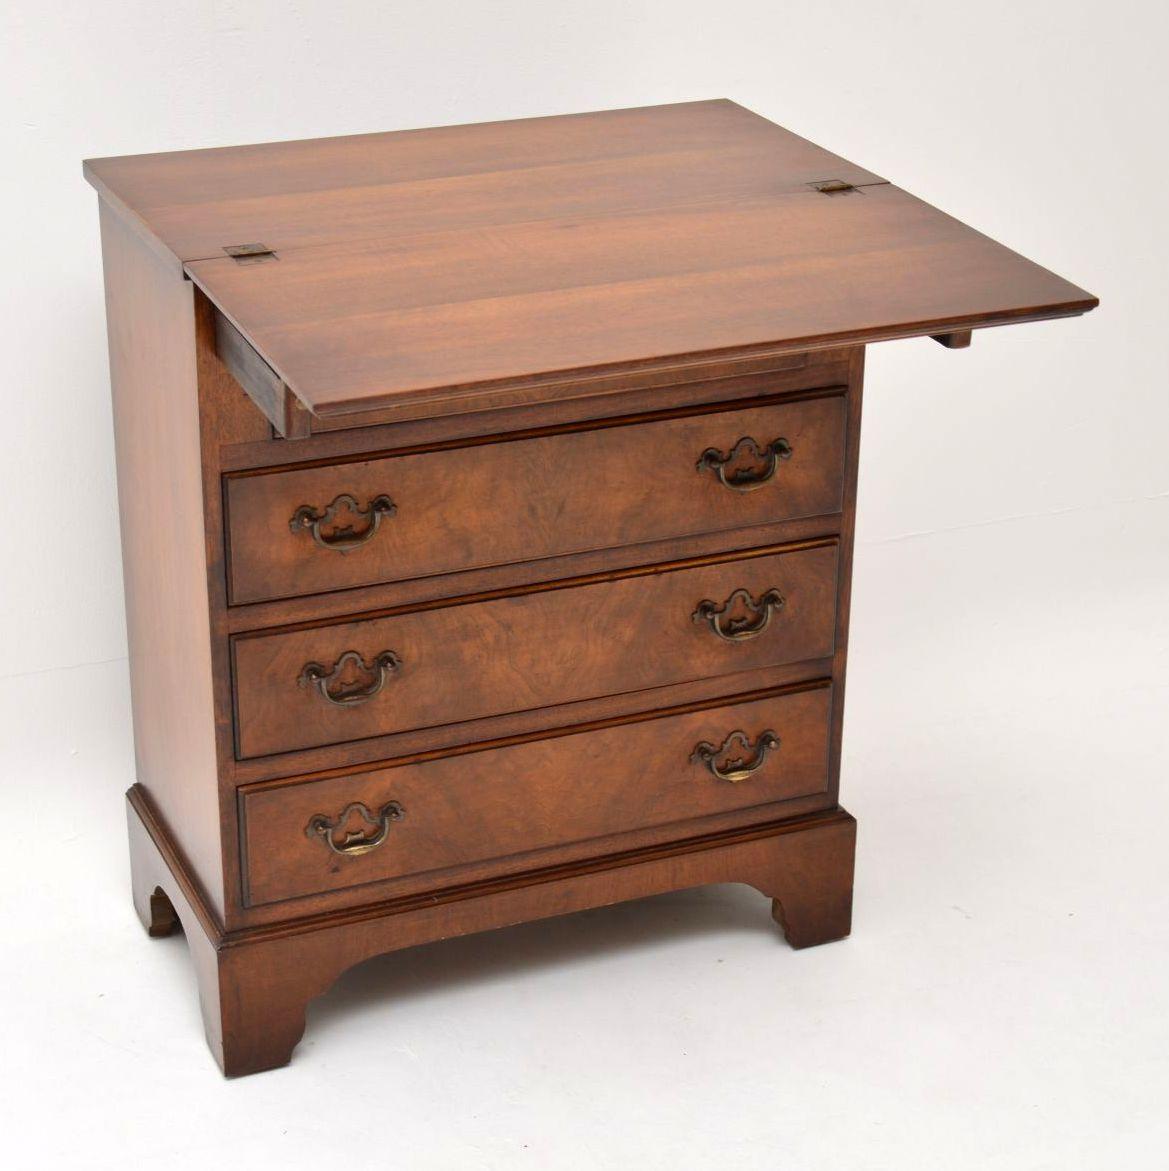 Small antique walnut bachelors chest of drawers in excellent original condition and with plenty of character. The top and drawer fronts are burr walnut while the sides are figured walnut. It has a very useful pull over top, which when opened